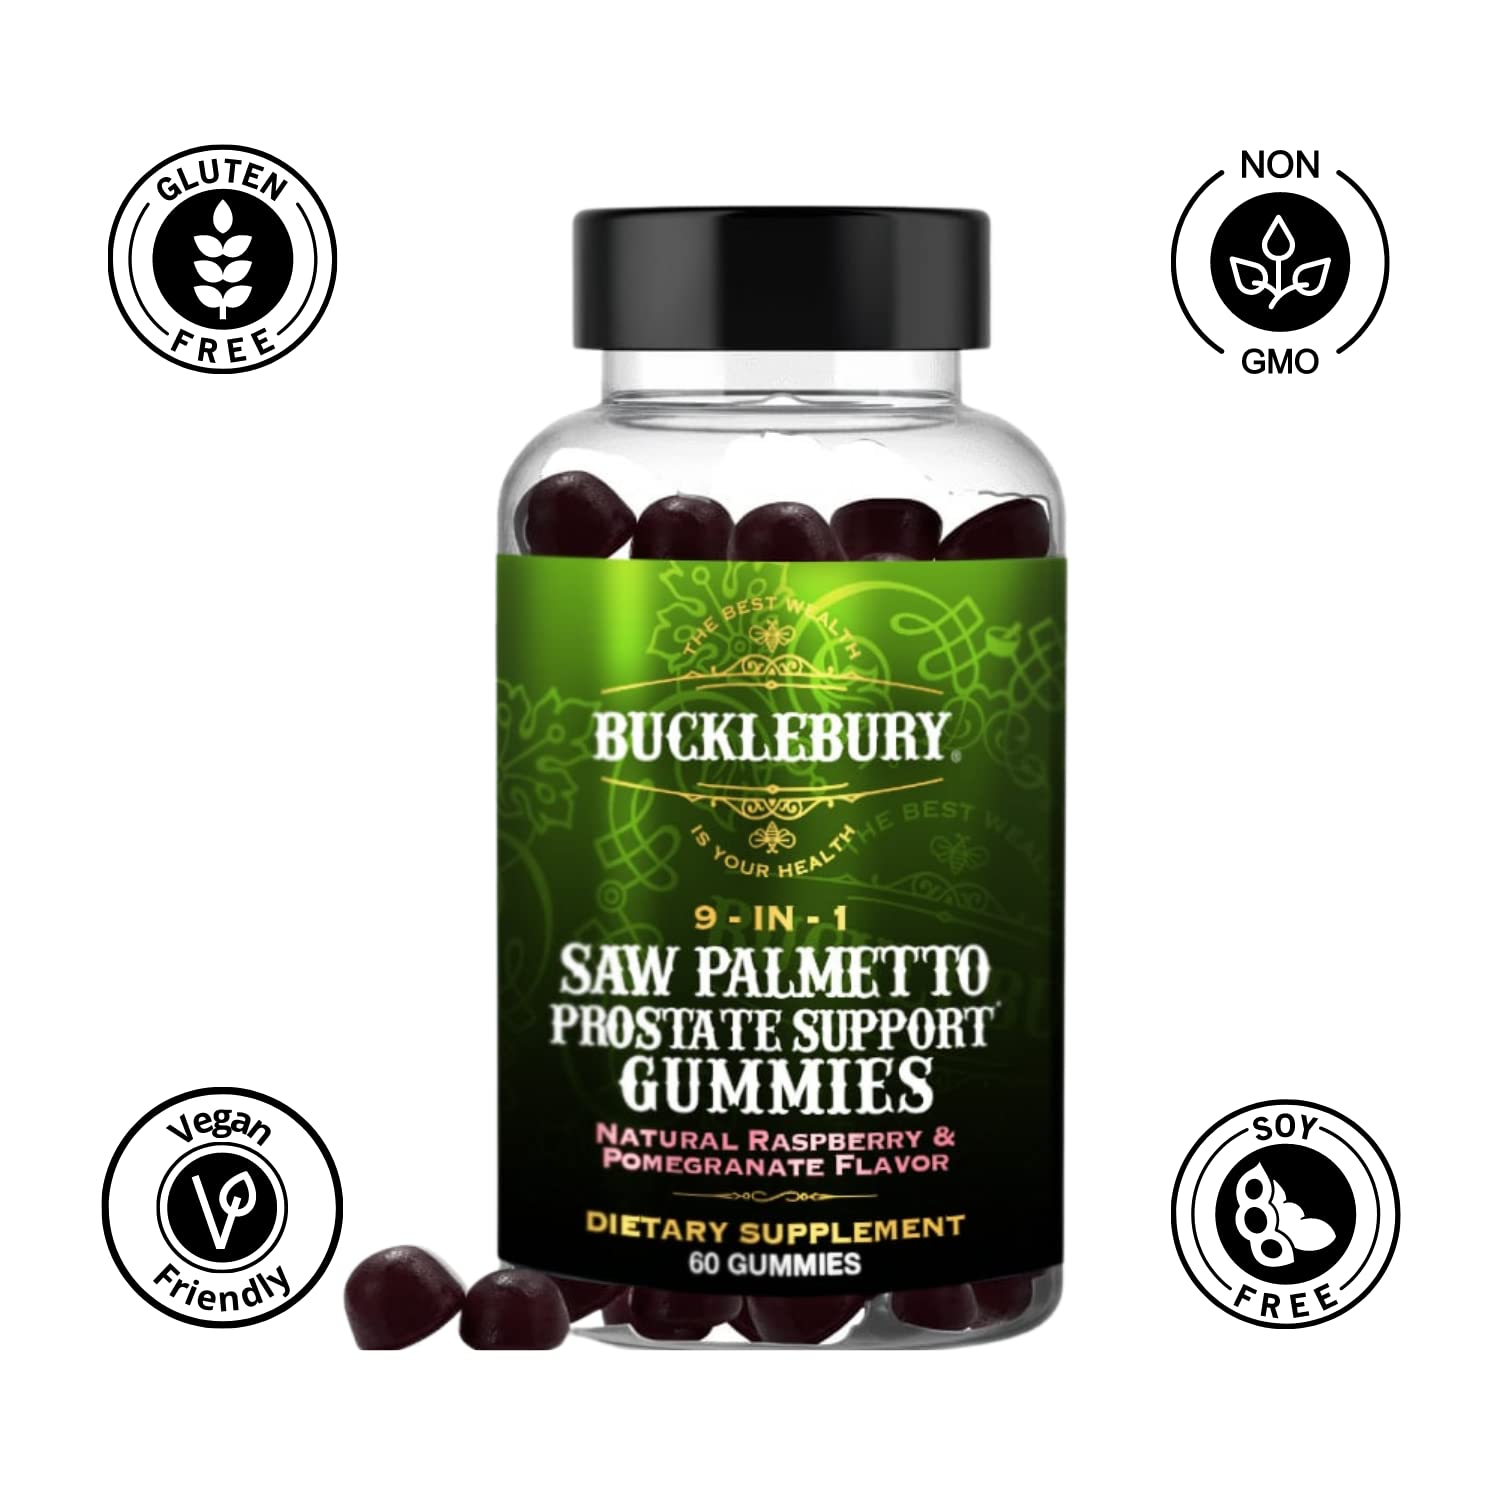 Image of 9-in-1 Saw Palmetto Prostate Support Gummies